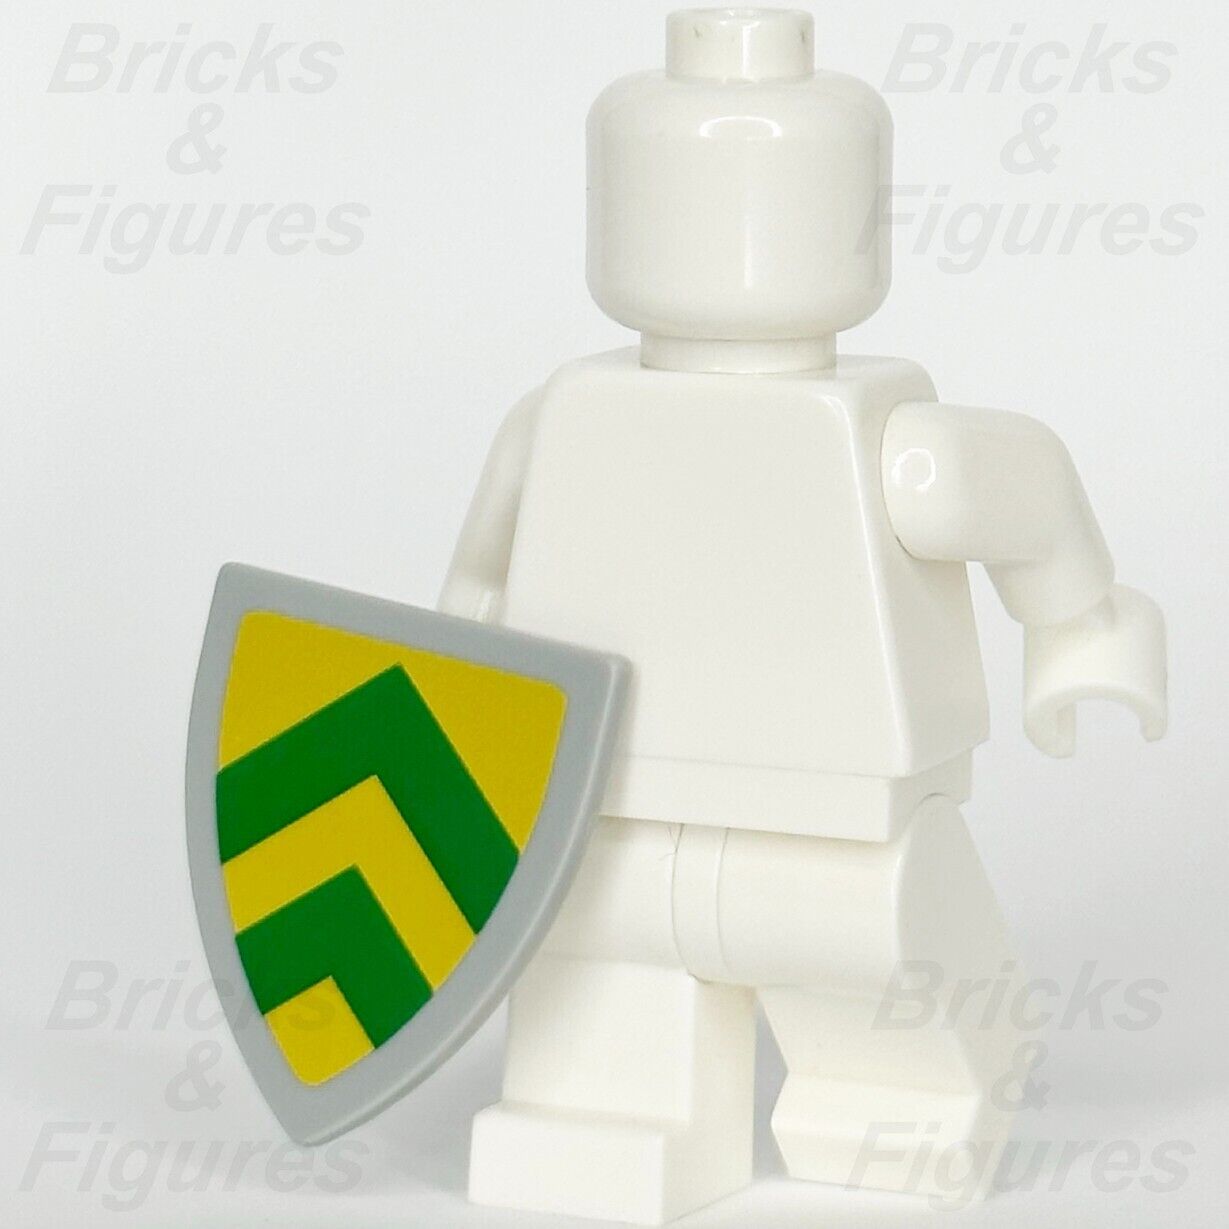 LEGO Castle Yellow Shield with Green Chevrons Minifigure Weapon Part 10305 x1 - Bricks & Figures